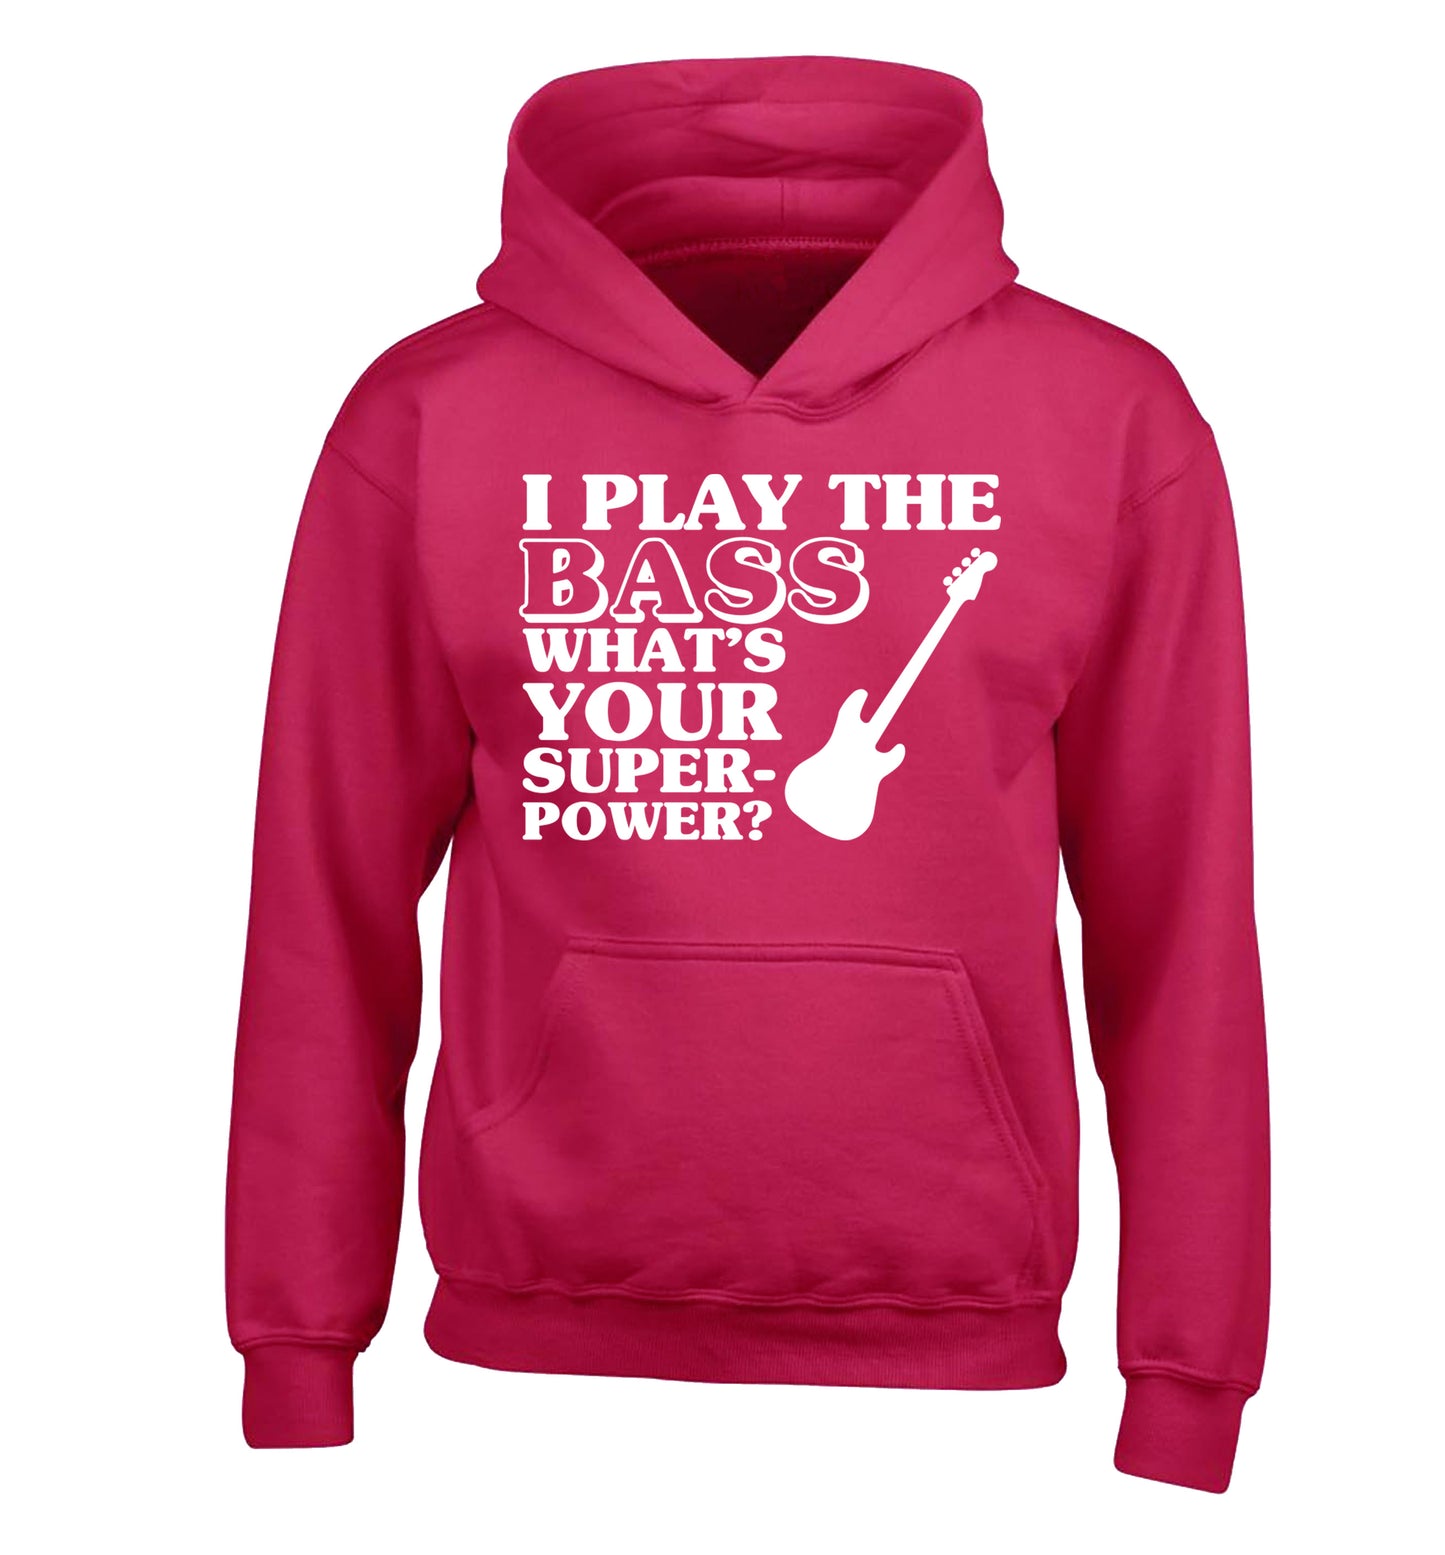 I play the bass what's your superpower? children's pink hoodie 12-14 Years